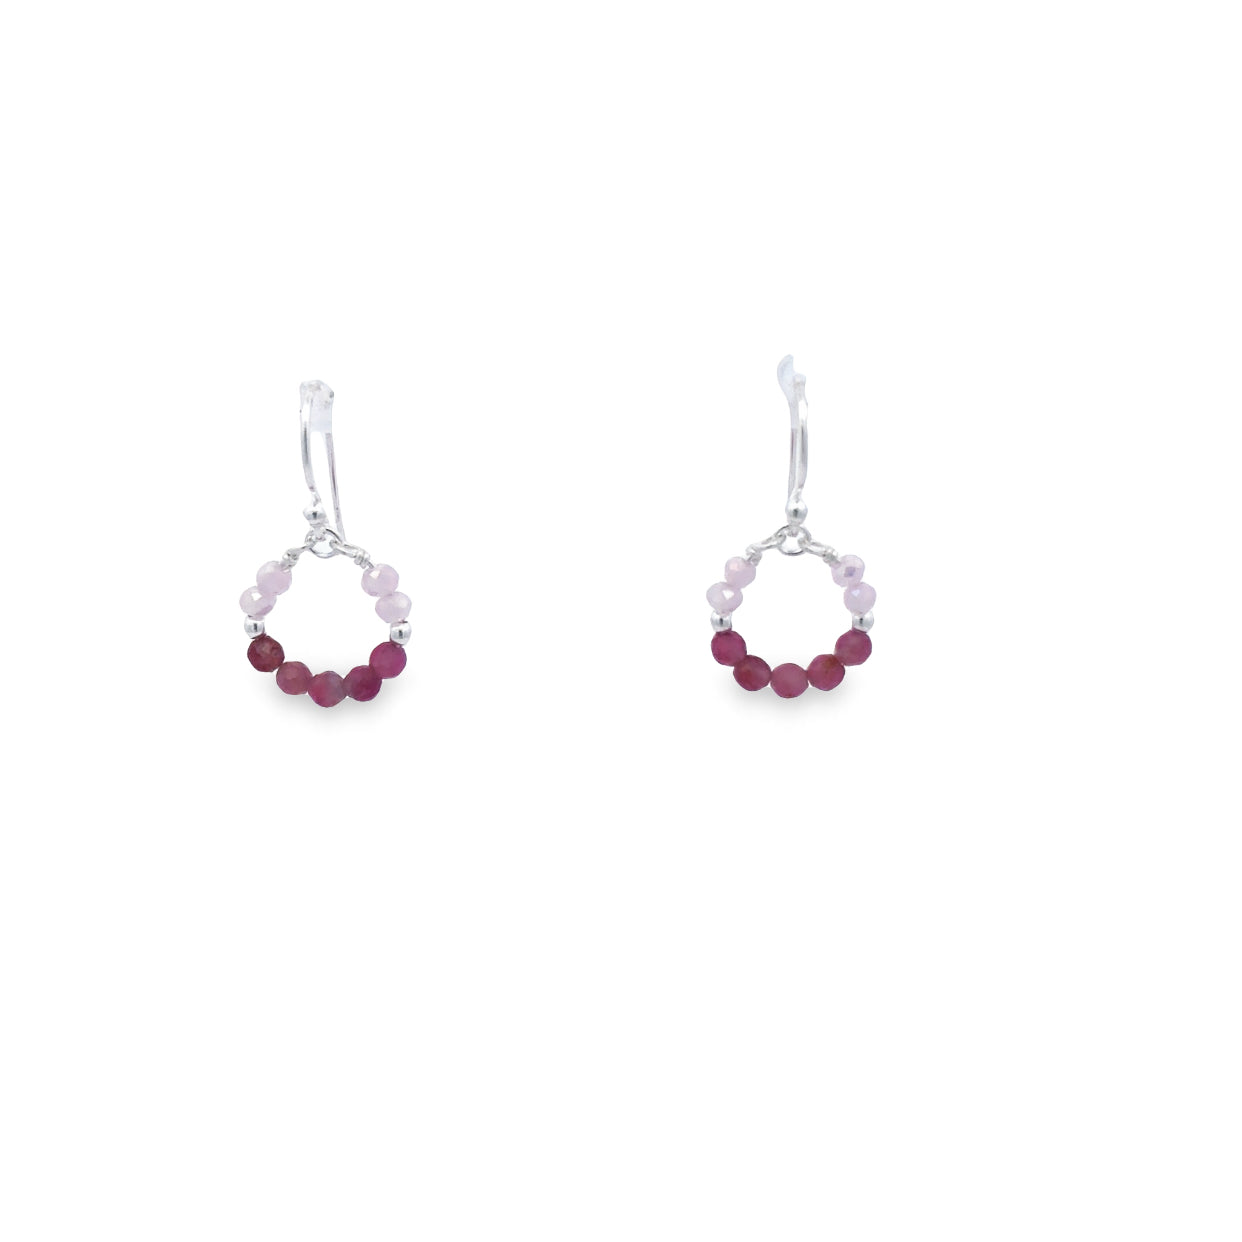 Sterling Silver Pink Coloured Stones Earrings With Shephooks